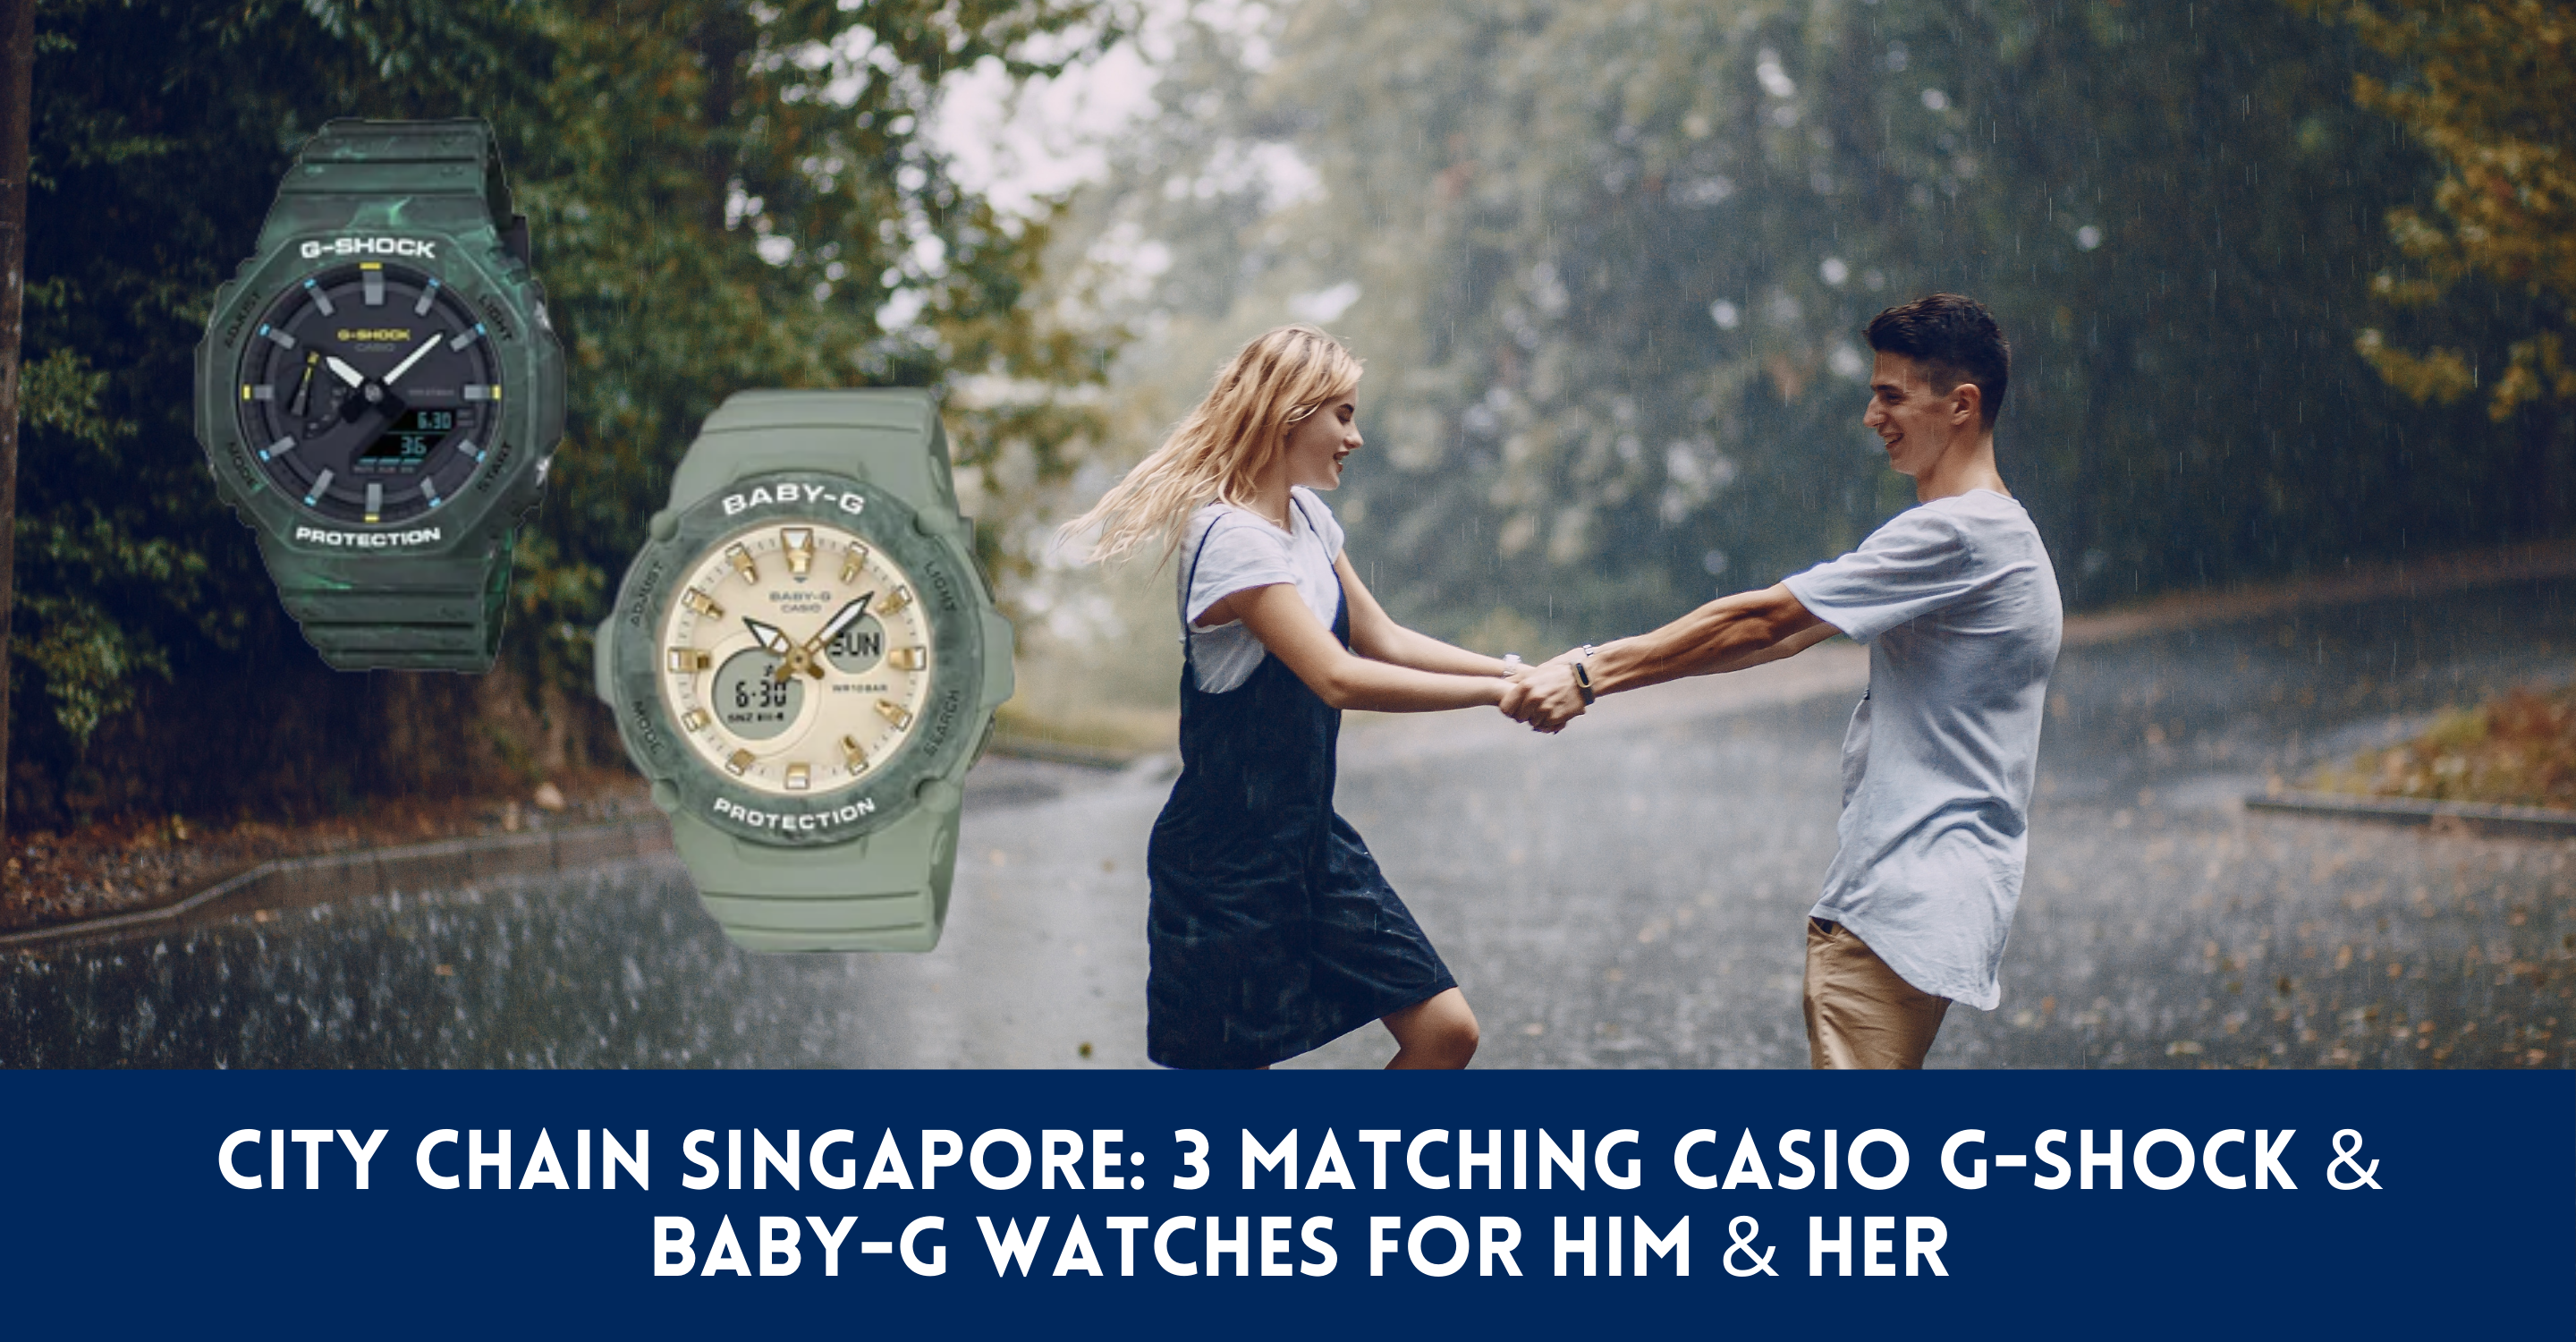 3 Matching CASIO G-Shock & Her For Baby-G Chain City Watches & Him Singapore –